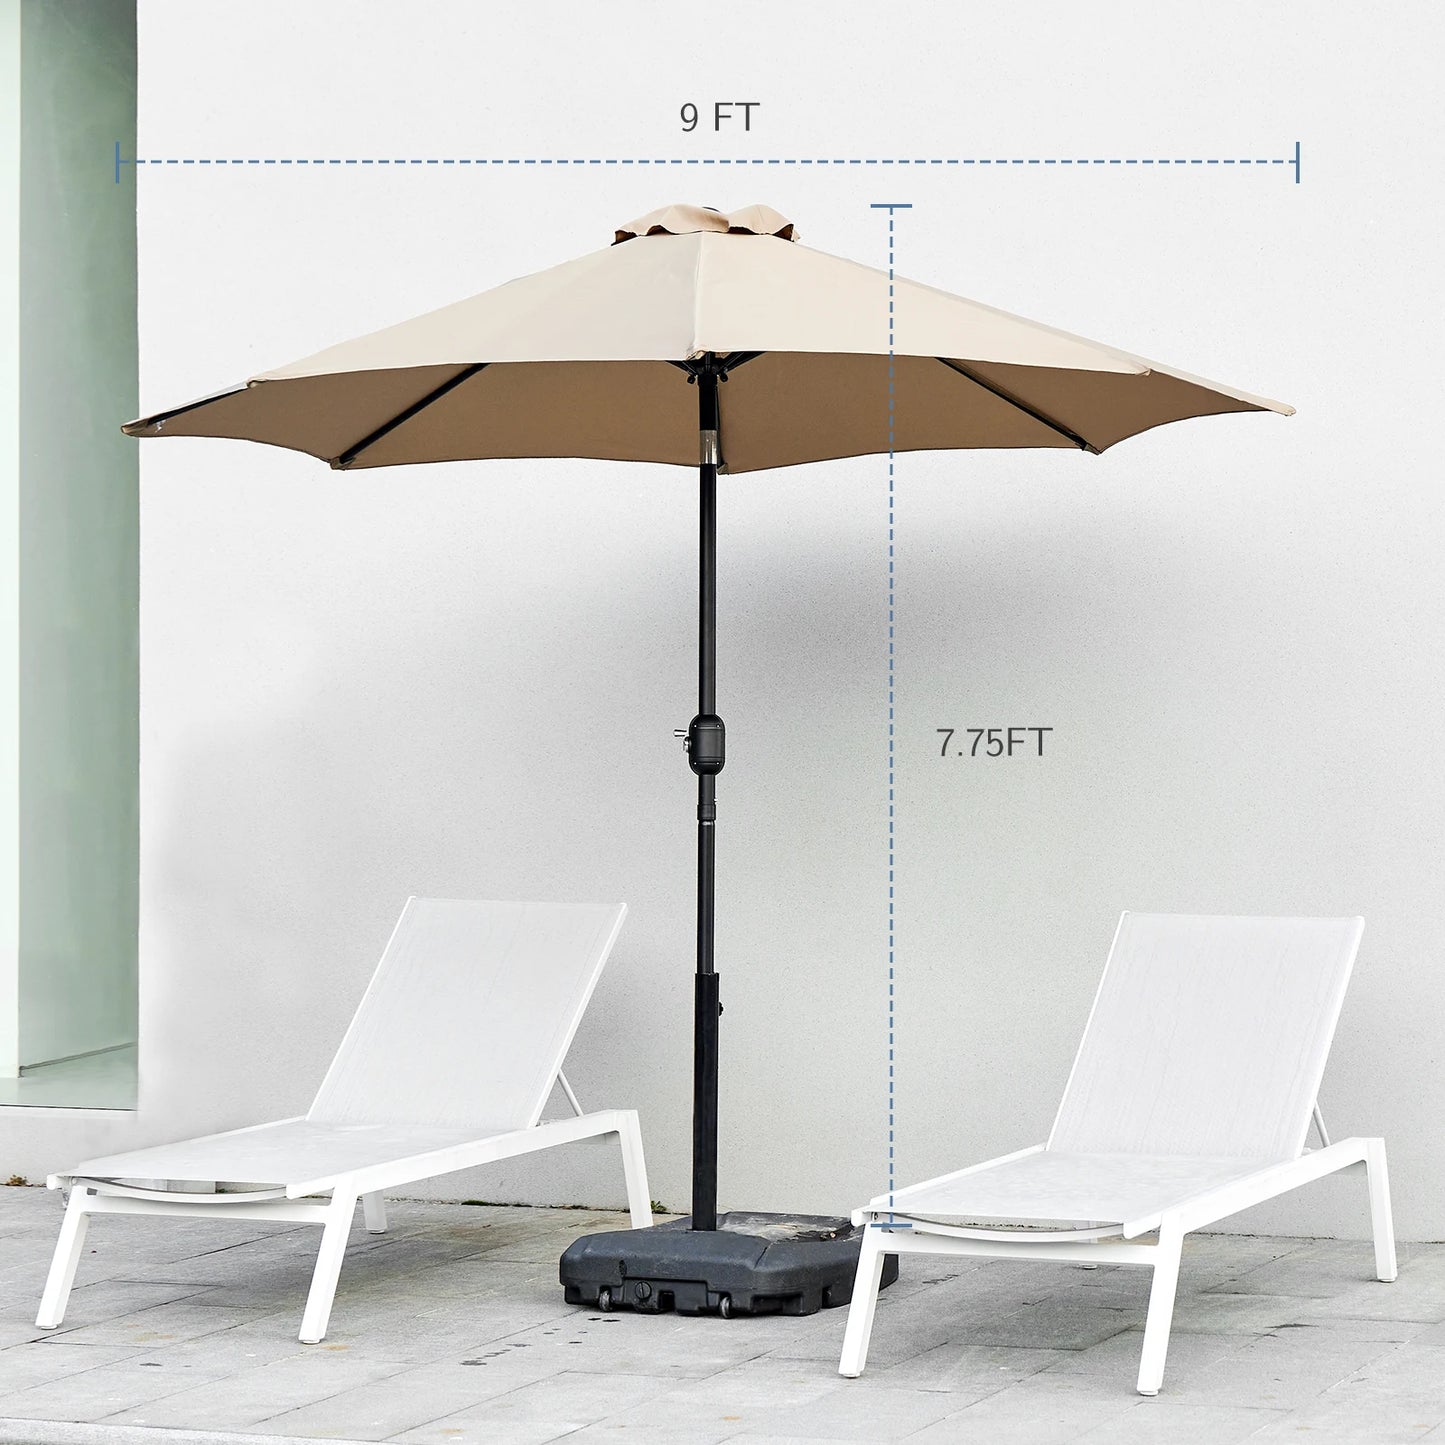 Outdoor Patio Umbrella UV Protection For Garden Sturdy Structure All Weather Outdoor Umbrellas For Backyard Pool Holidays